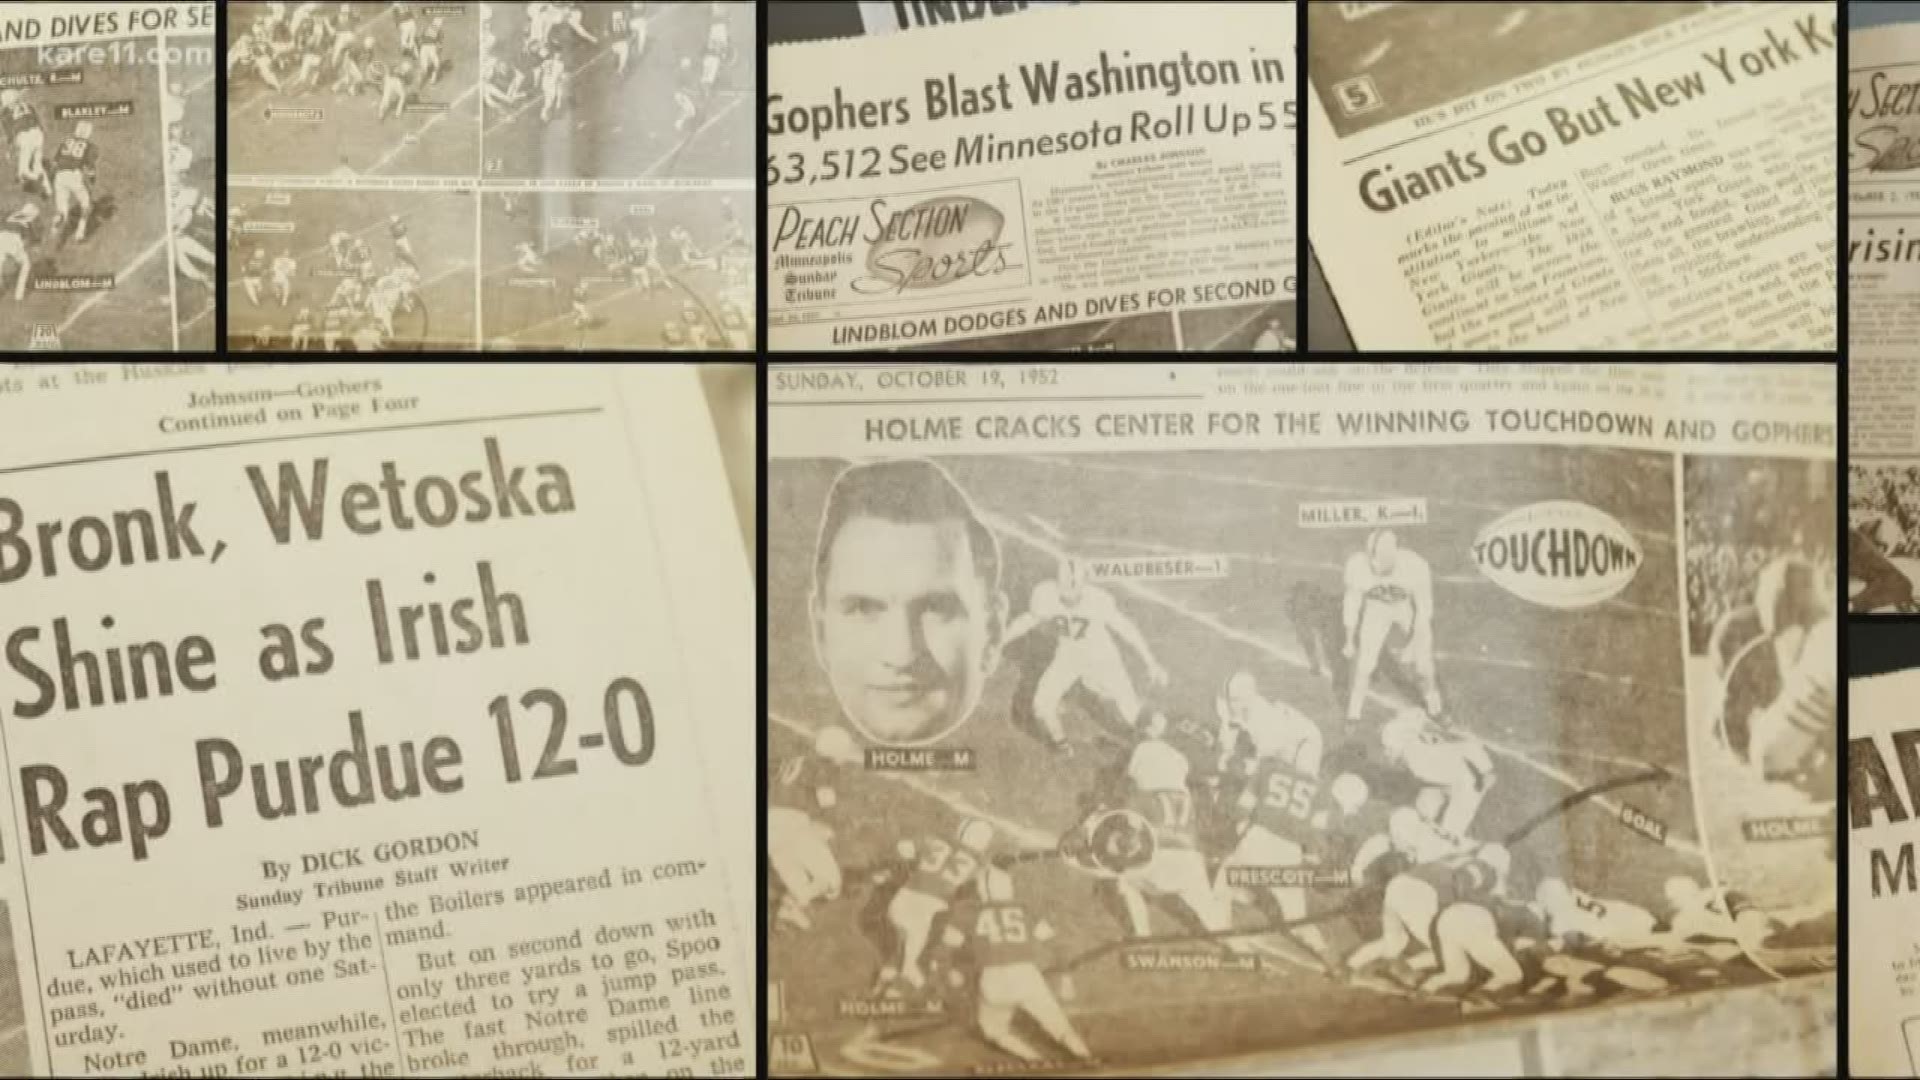 The Minneapolis-based newspaper brings back its Sunday peach section, which began 80 years ago for Sunday college football fans.